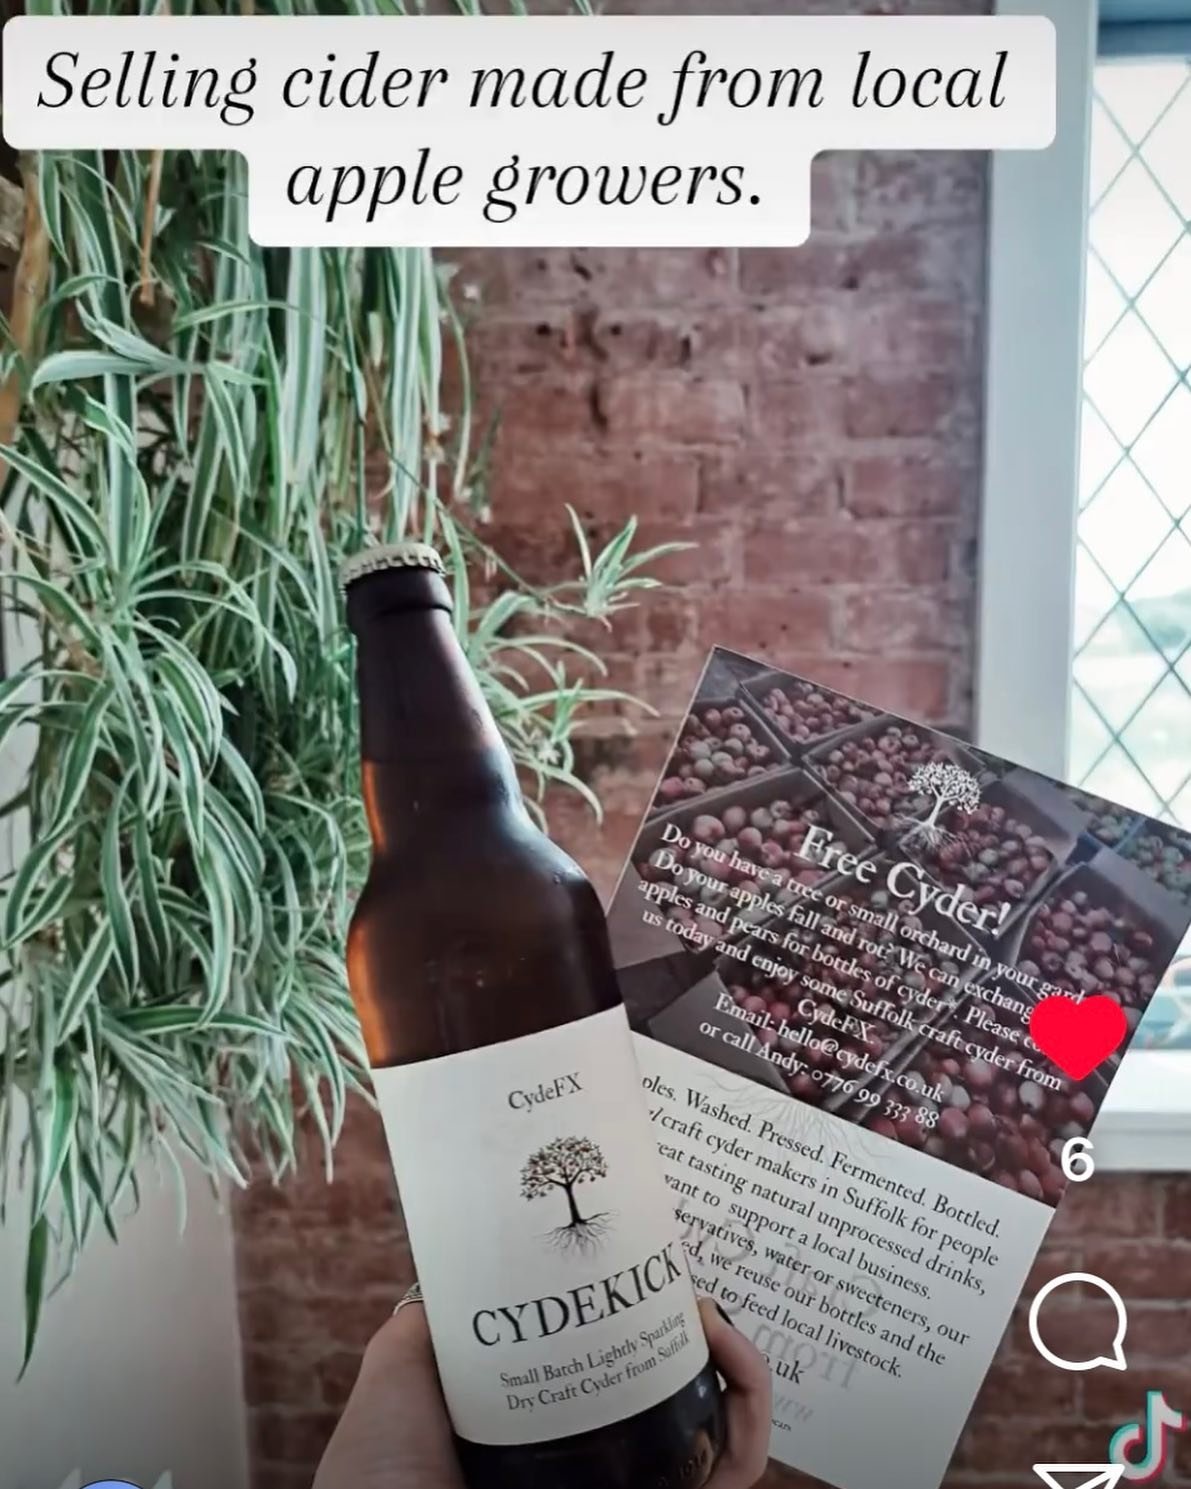 We do like it when one (@crosskeys_pub_ ) of our customers includes us in a reel or post. Especially when we work with them, creating something special just for them, benefiting from referrals for more apples, or just following their ideals. This is 